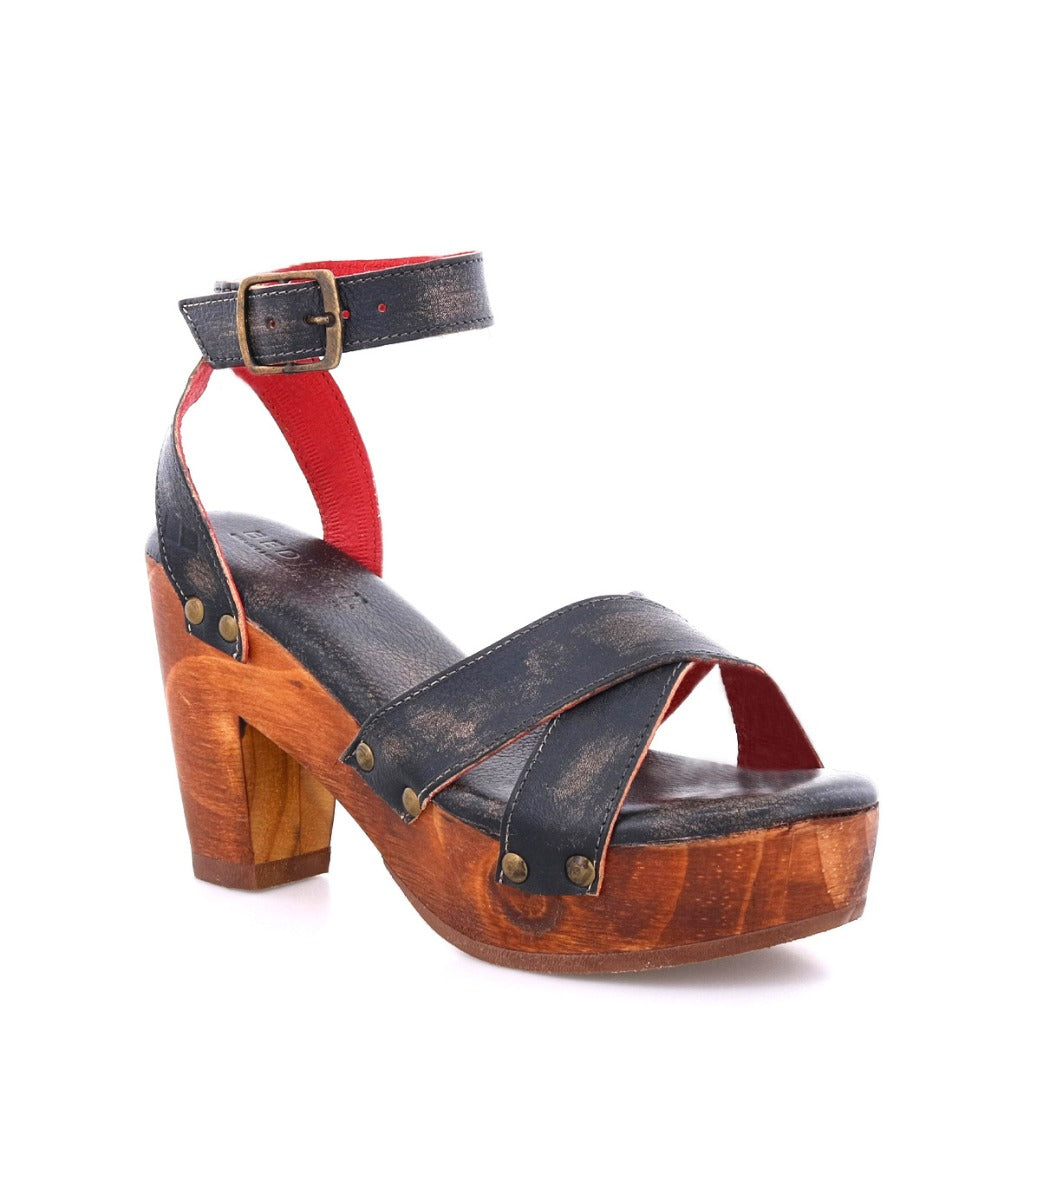 A Kalah sandal by Bed Stu, with a wooden platform and straps.